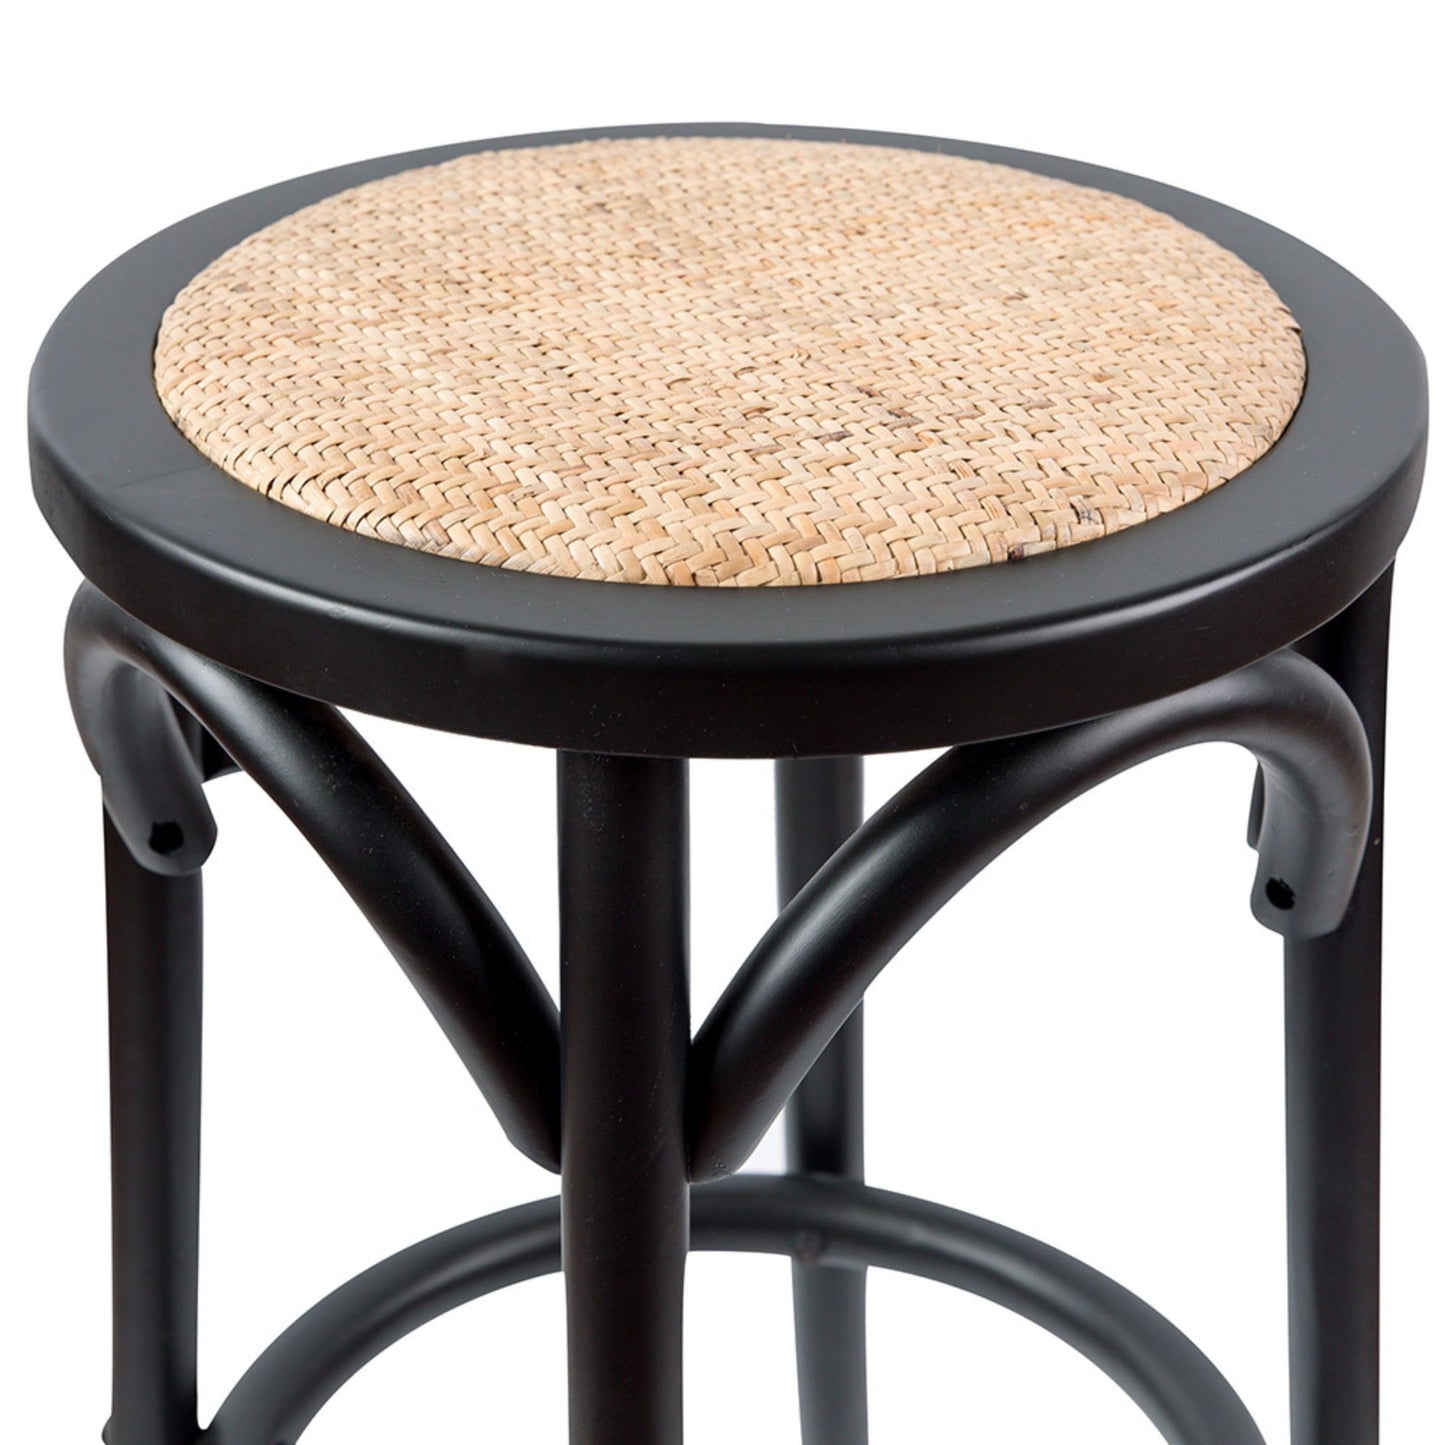 Aster 4pc Round Bar Stools Dining Stool Chair Solid Birch Wood Rattan Seat Black